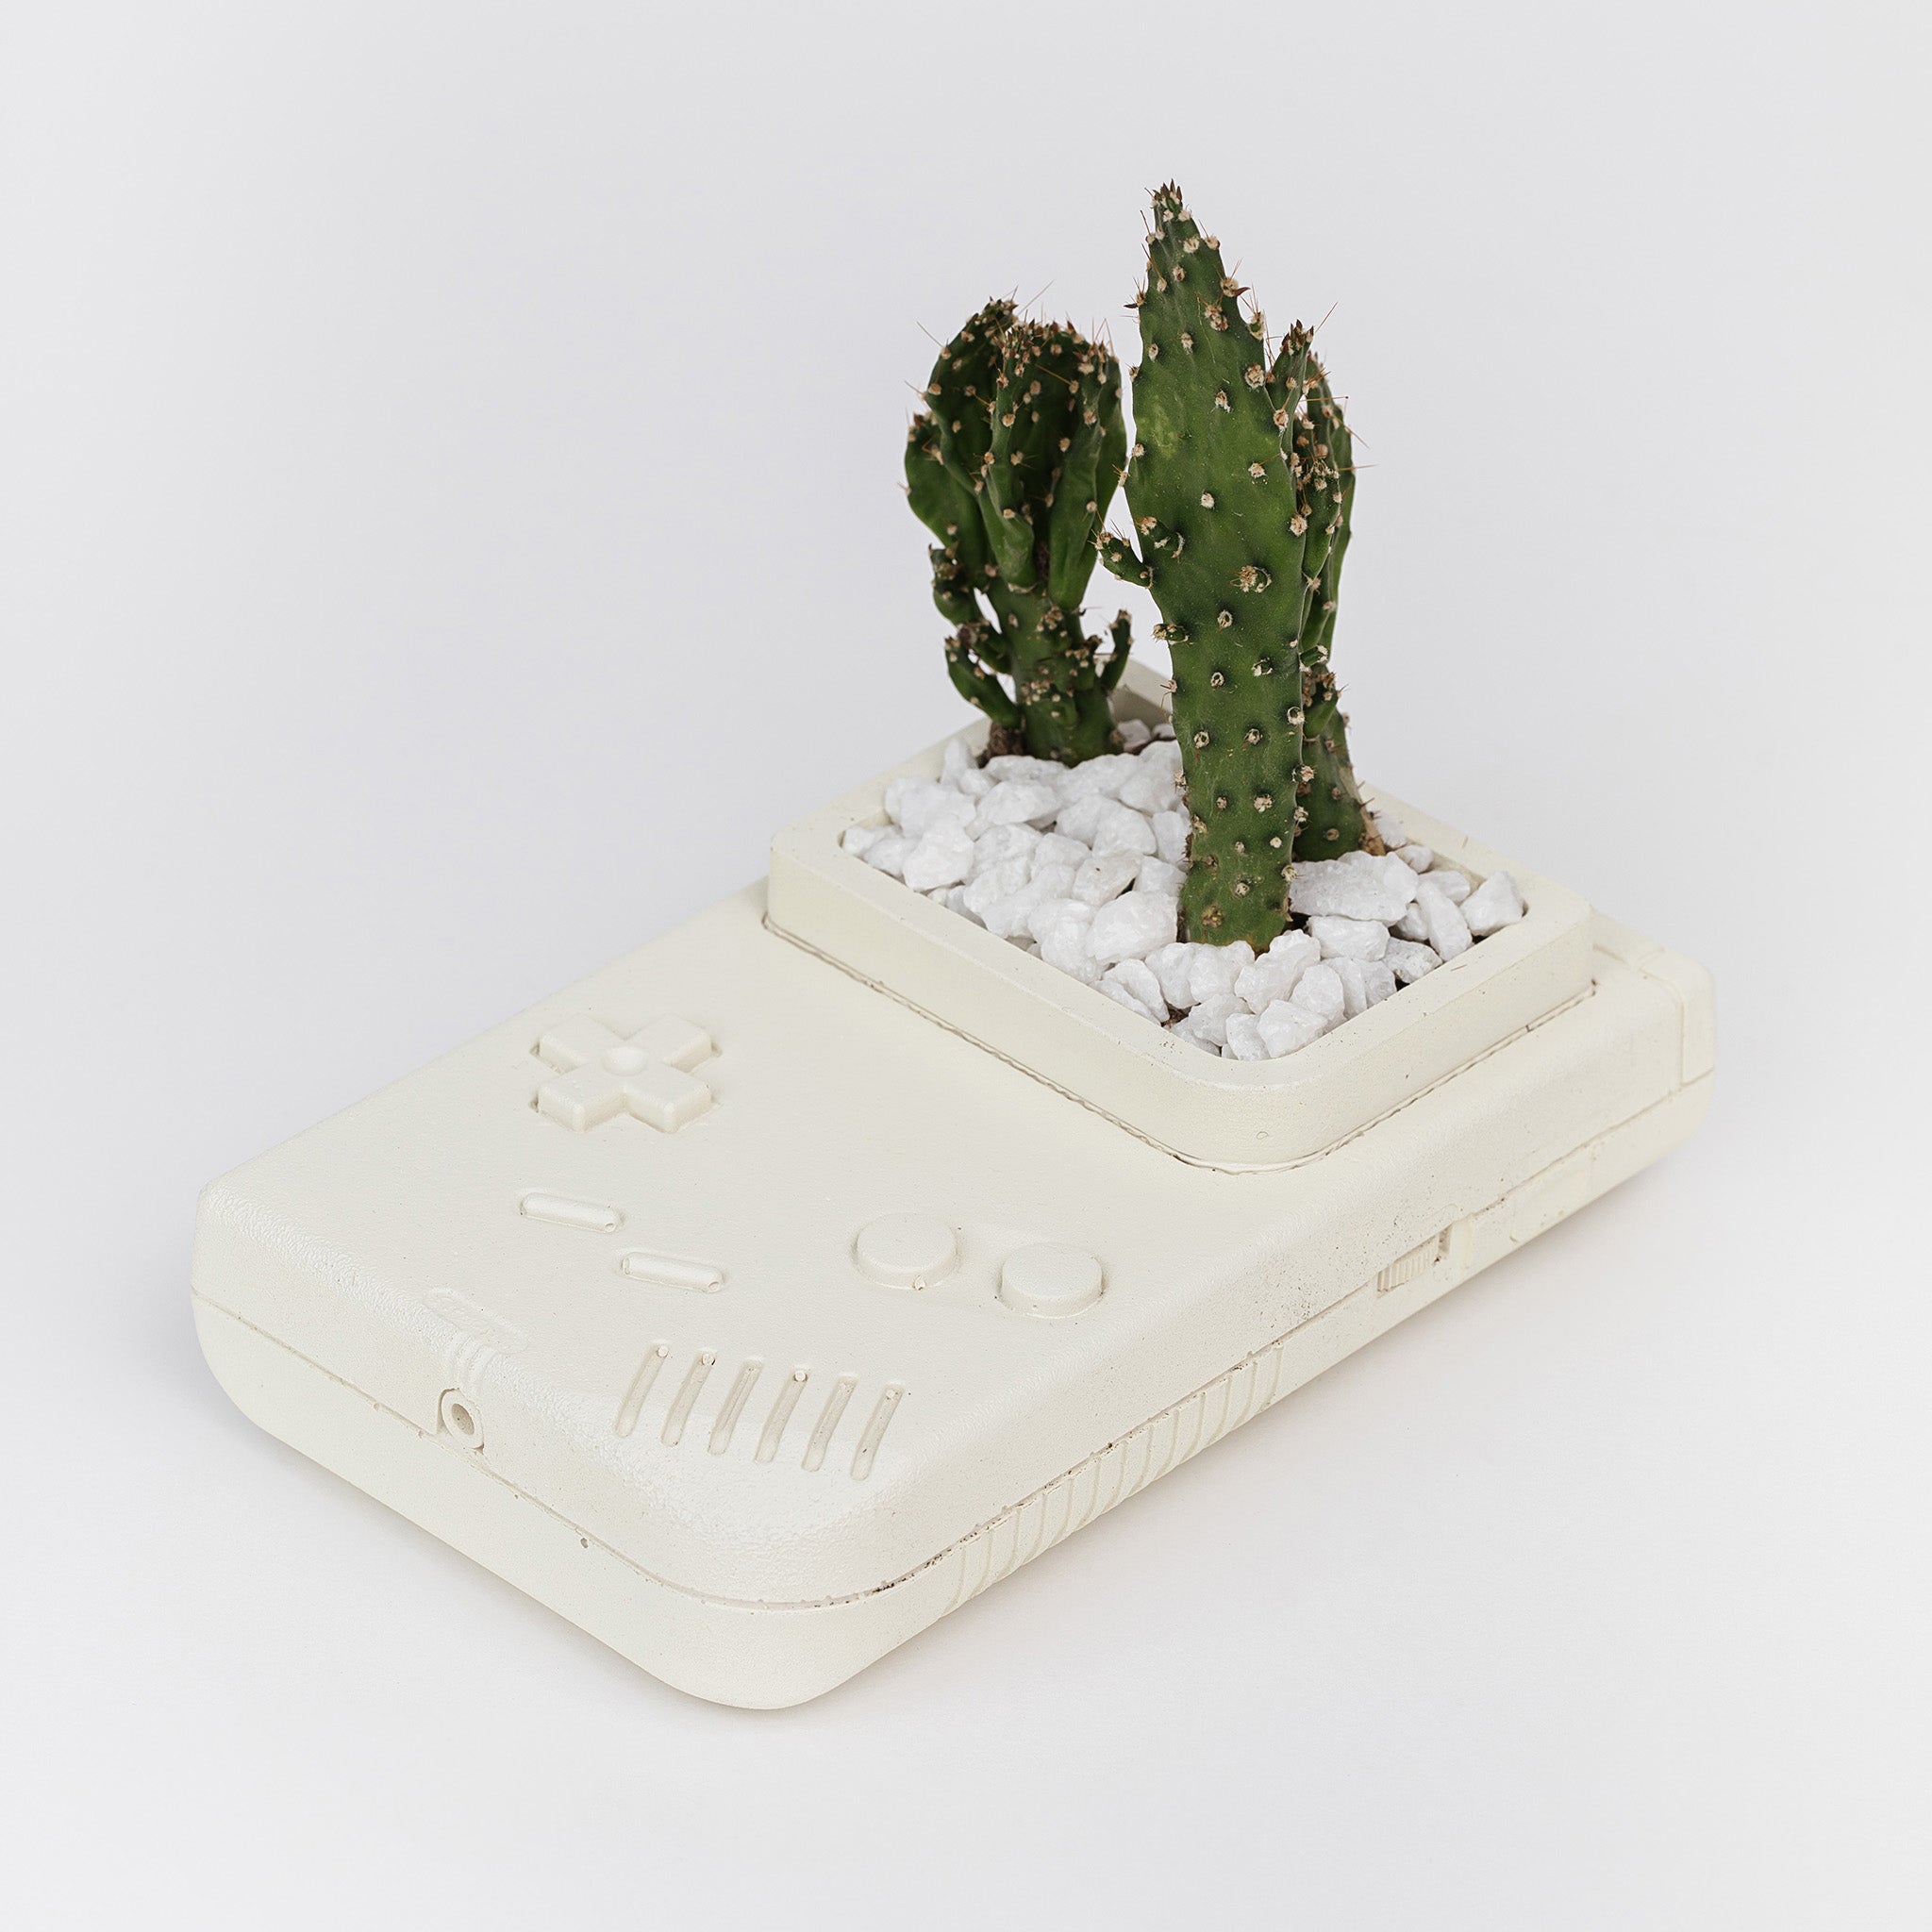 Video game Nintendo gameboy console stone planter with cactus